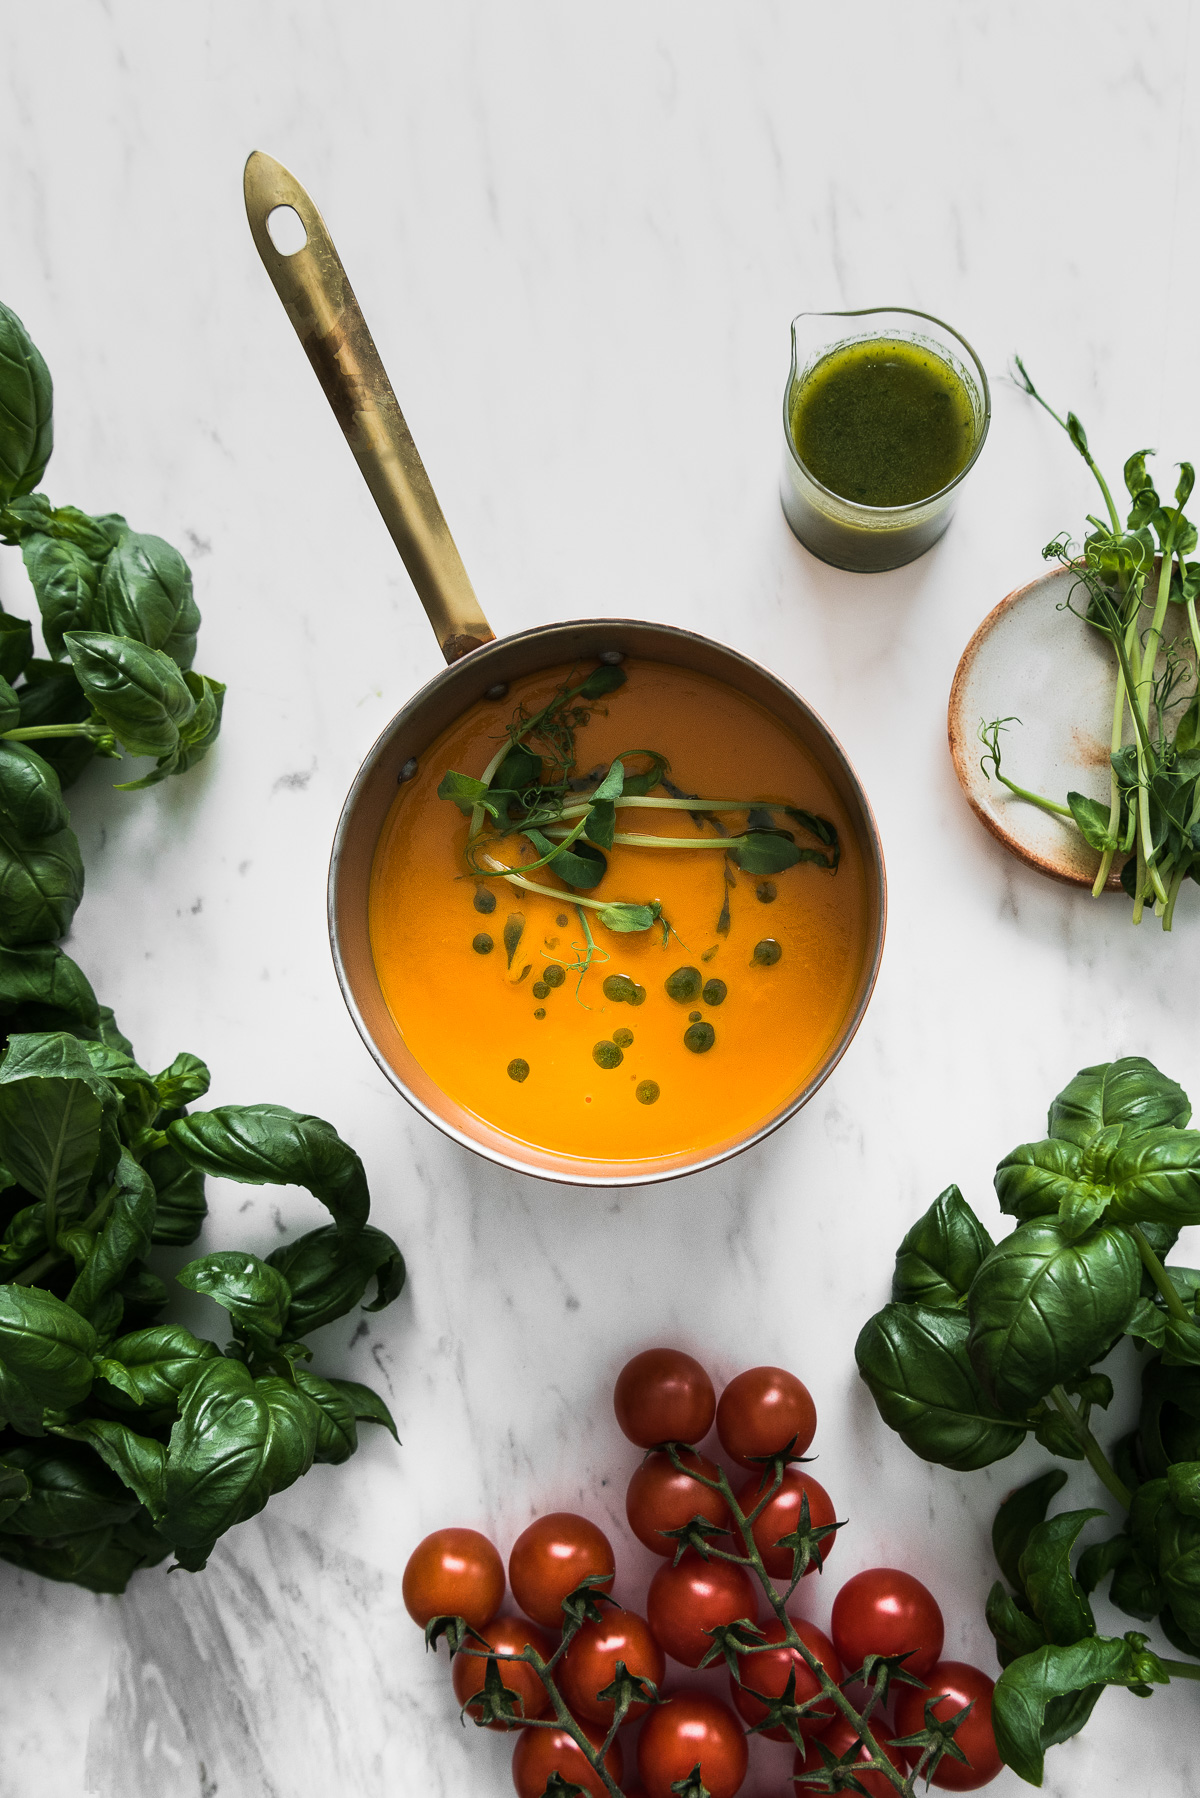 Clean and simple fresh yellow tomato soup recipe - Rhubarbarians